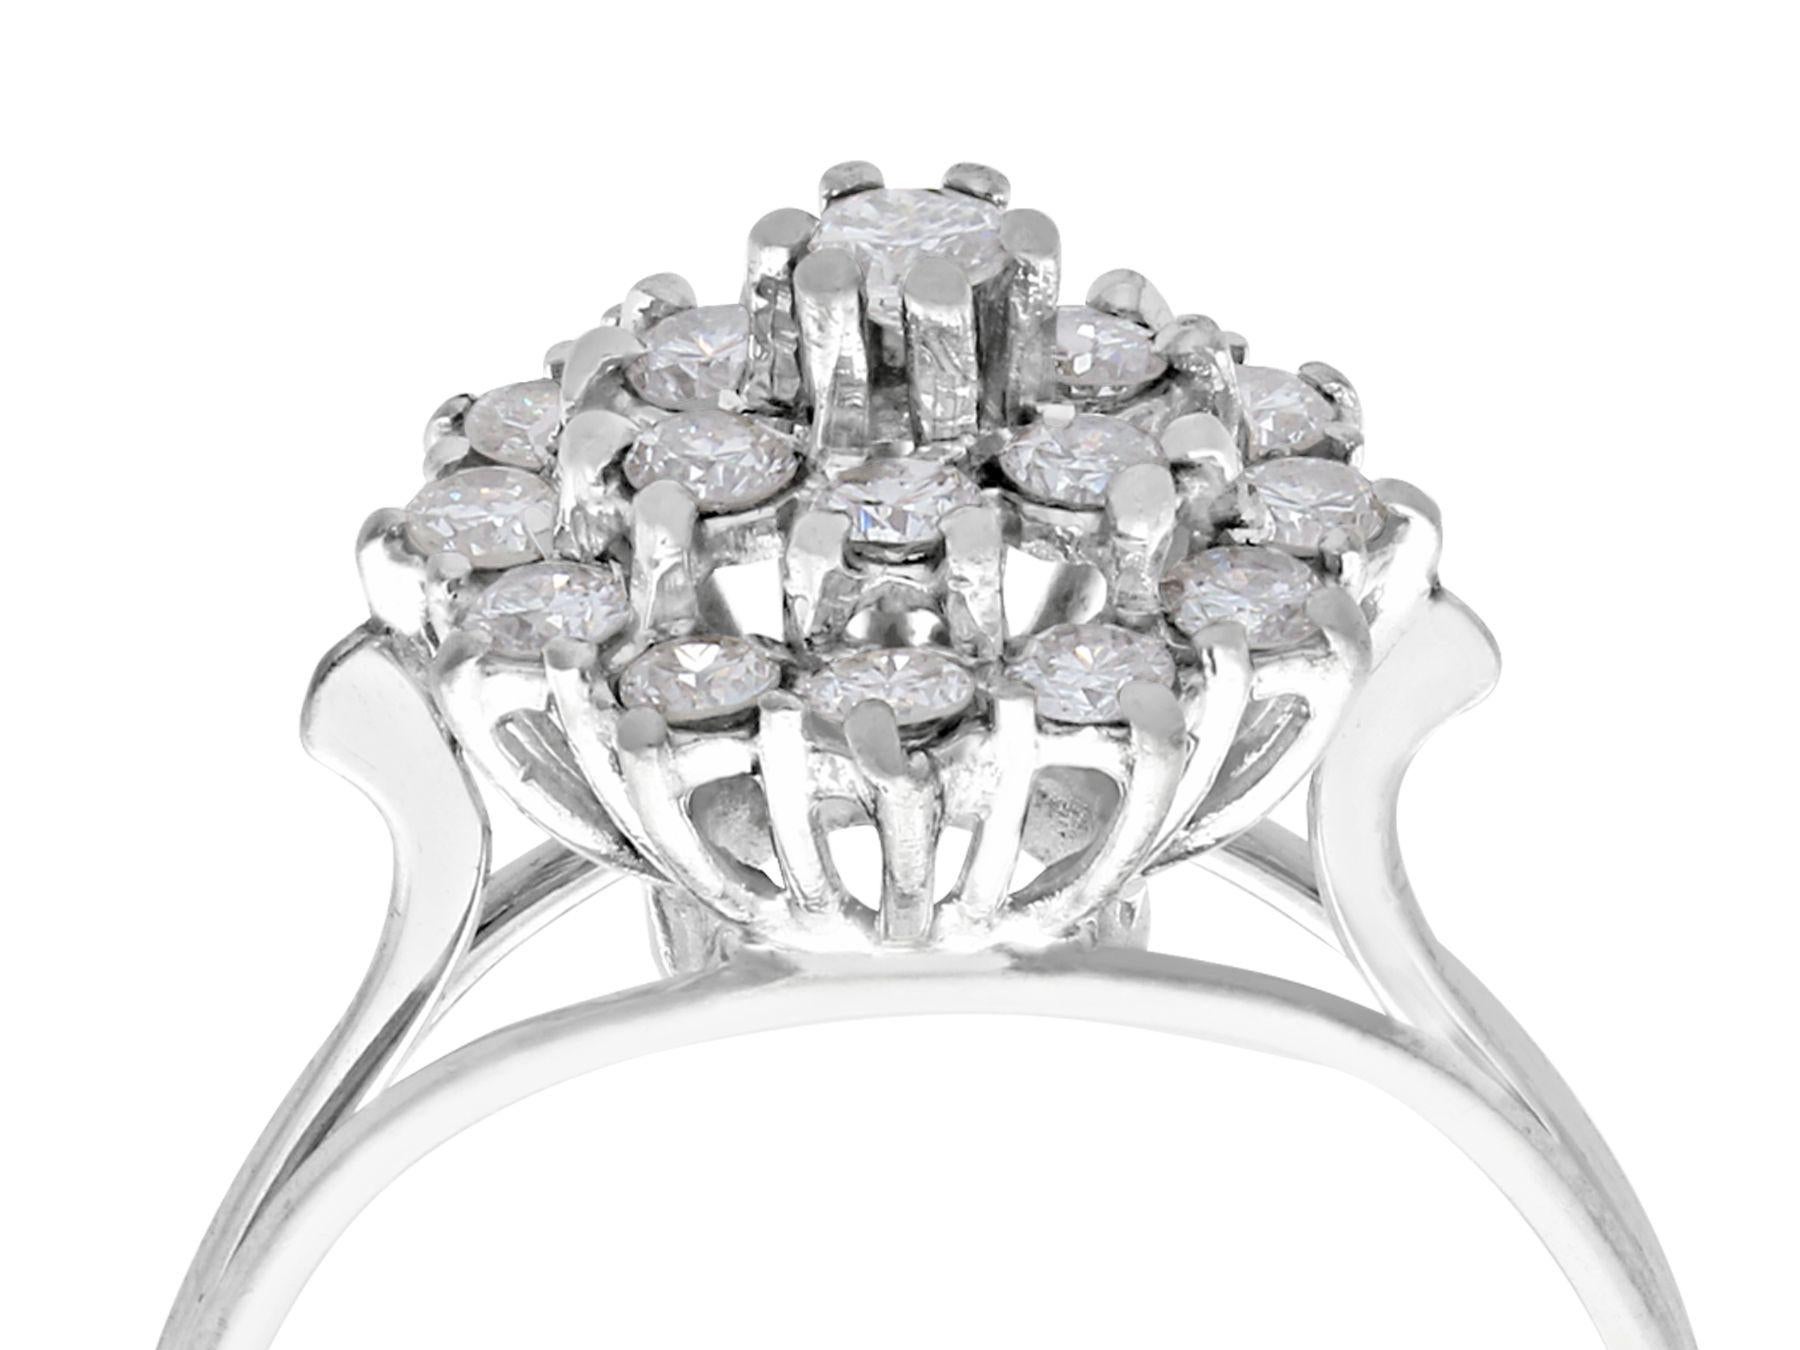 A fine and impressive vintage 0.75 carat and 18 karat white gold cluster ring; part of our vintage jewelry and estate jewelry collections

This fine vintage diamond cluster ring has been crafted in 18k white gold.

The pierced decorated boat style